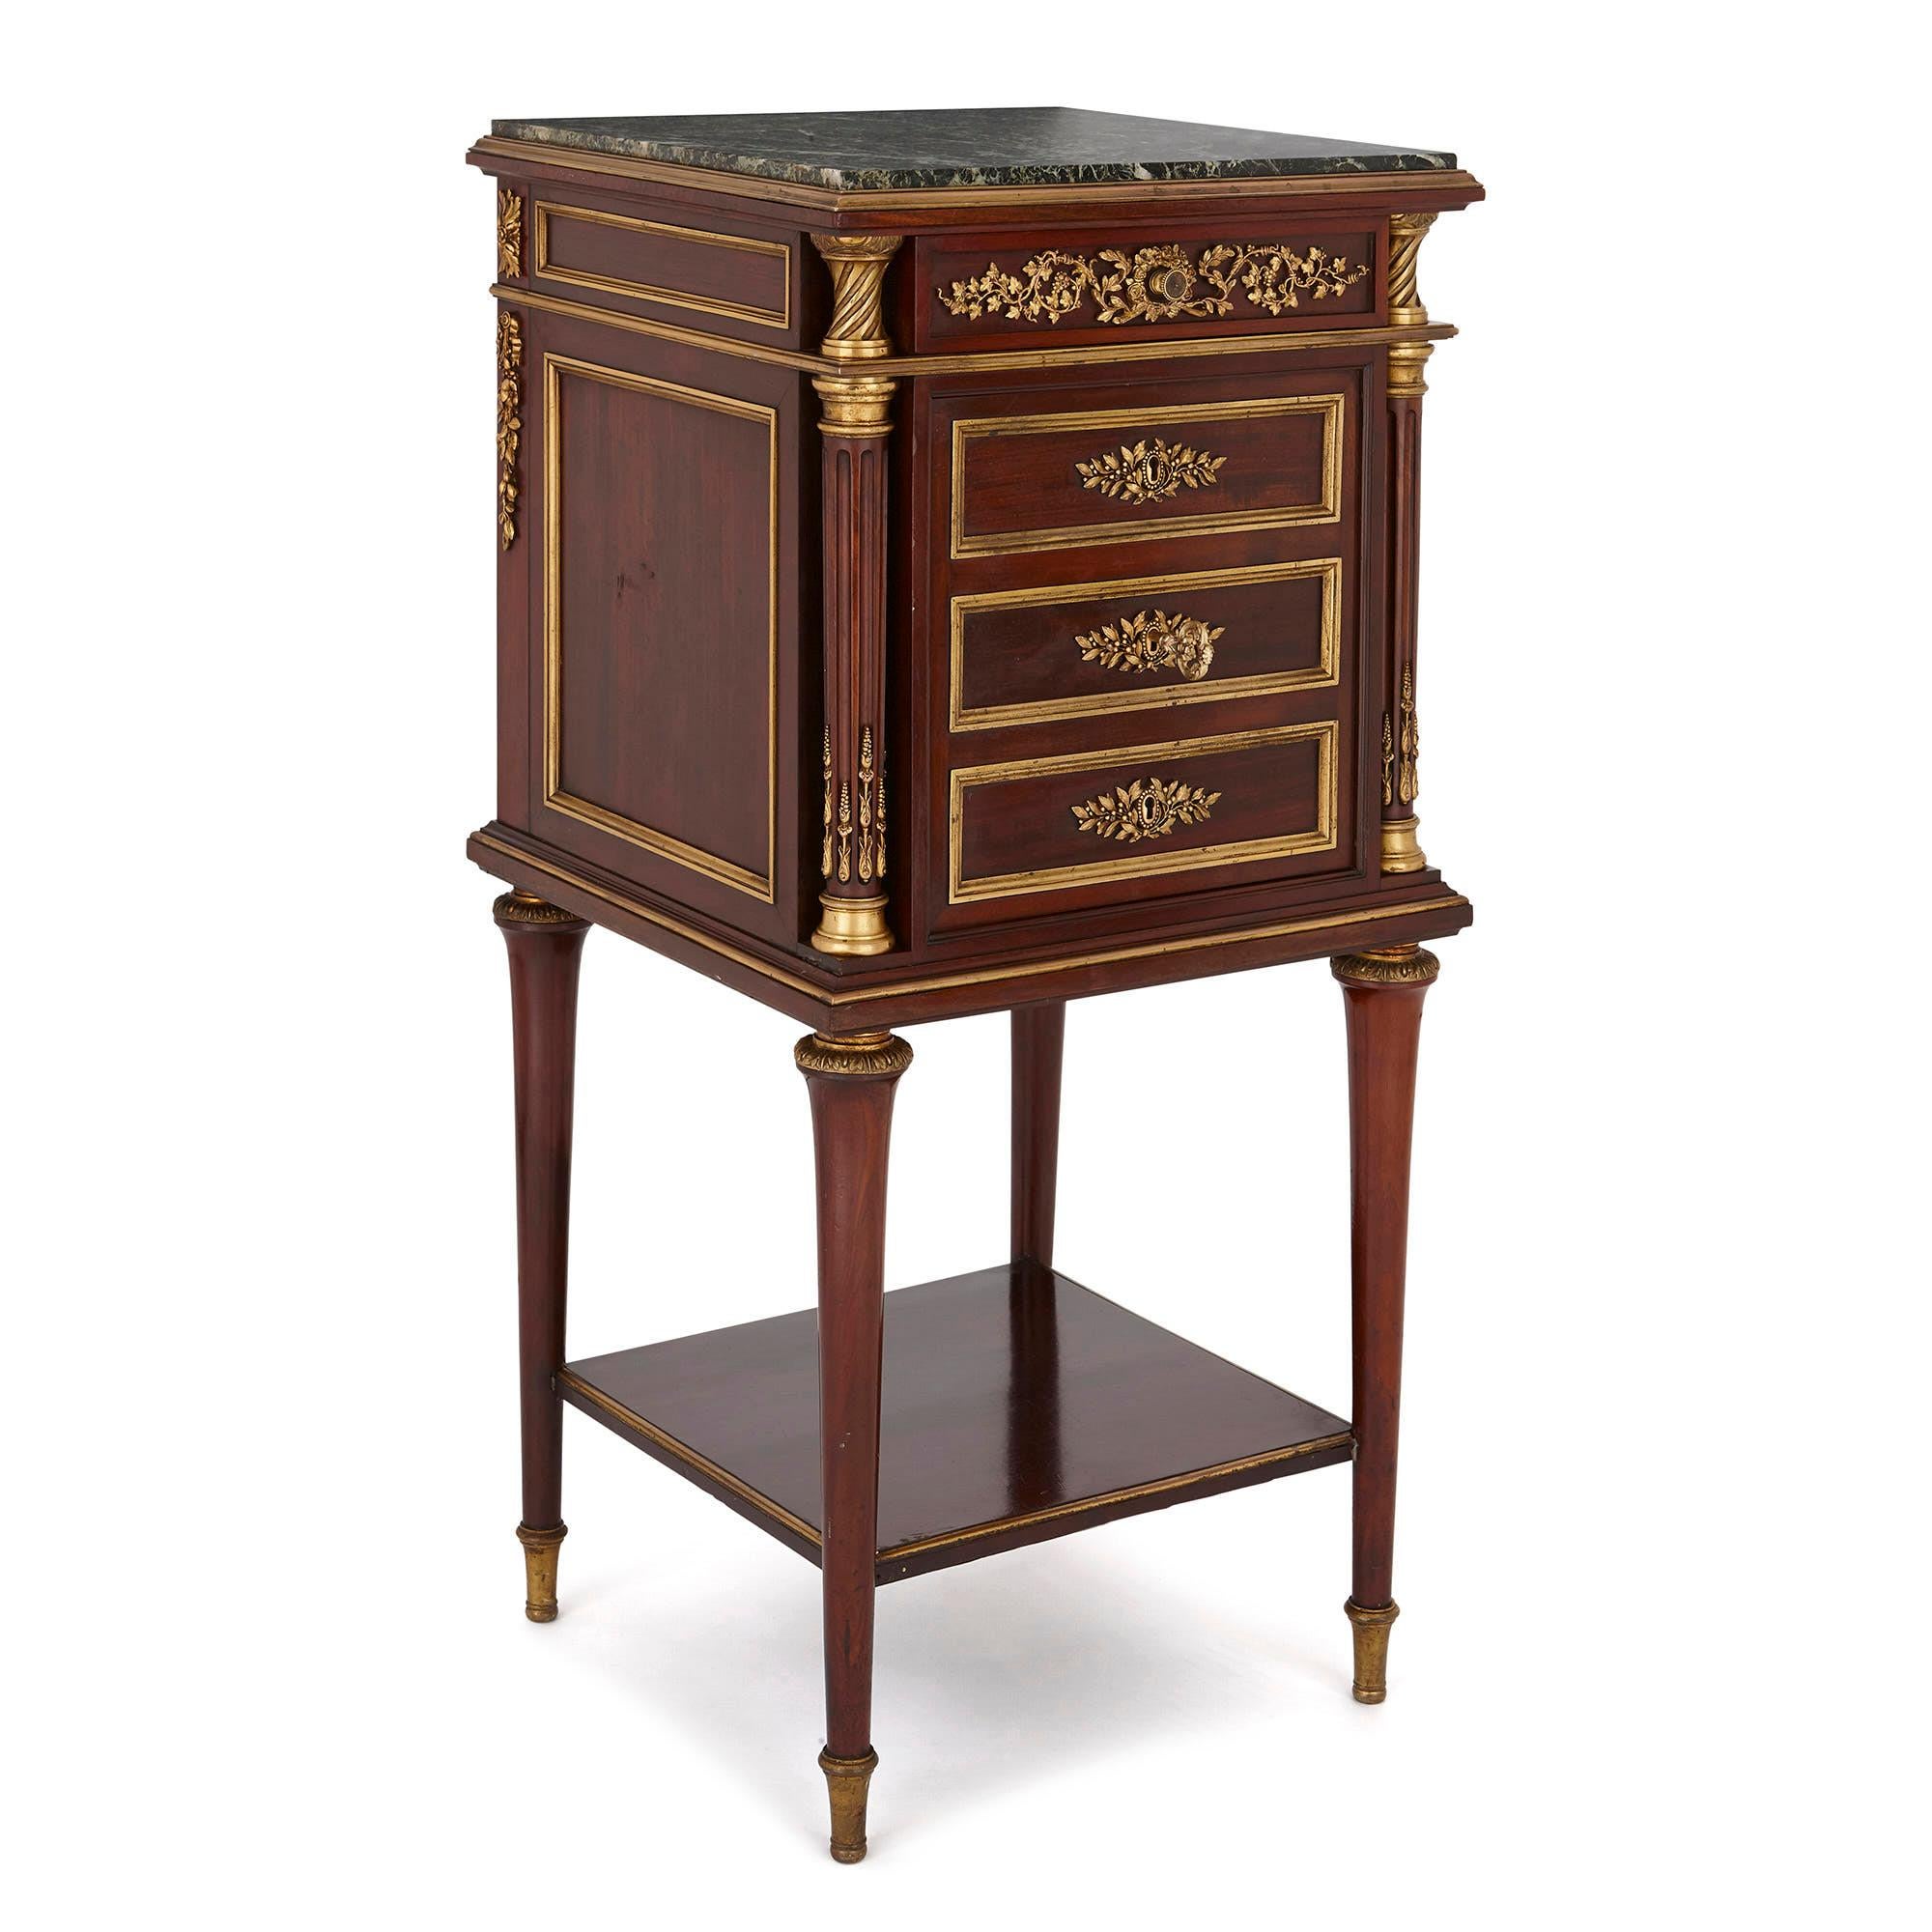 Created in the late 19th century, this beautiful cabinet is designed in the style of furniture produced in the Louis XVI period (1774-1793). This period saw the emergence of a refined Neoclassical style which was subsequently called the Louis XVI or